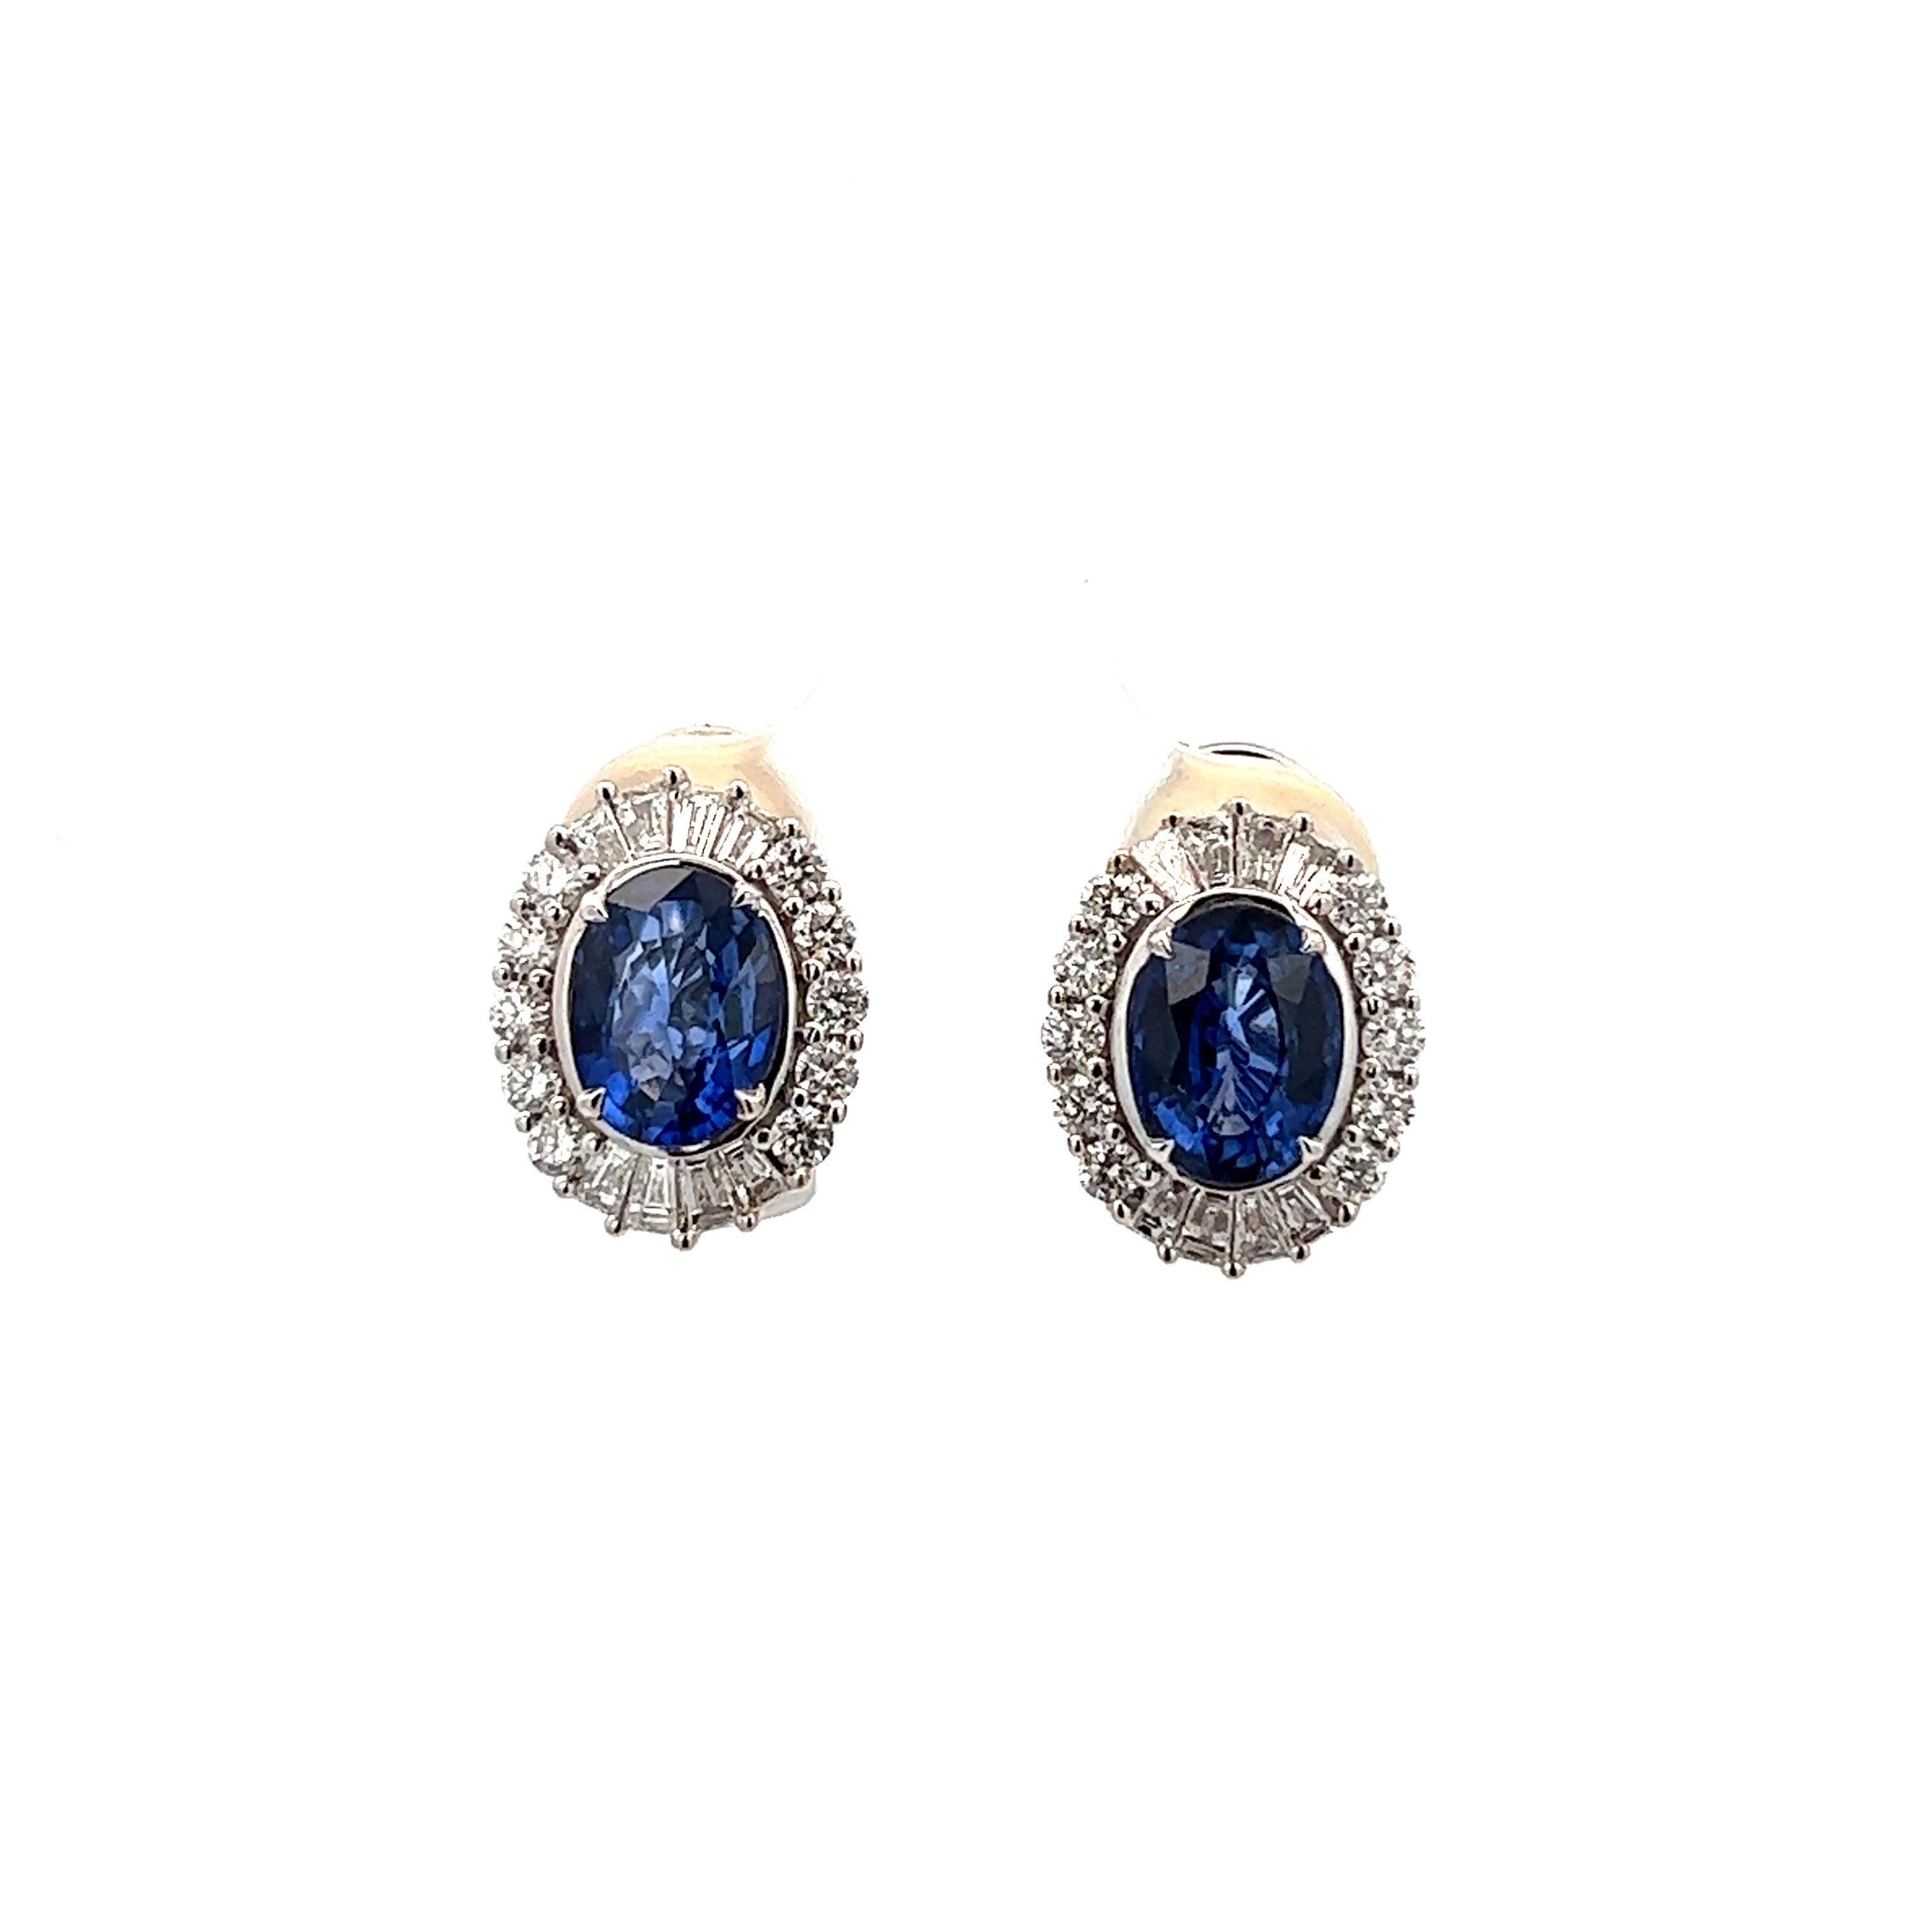 Beautiful Blue Halo Sapphire Earrings with 14KW settings
3.20ct Sapphire
0.94ct Diamonds

Total 4.14 ct

VS2-S1 clarity
GH color